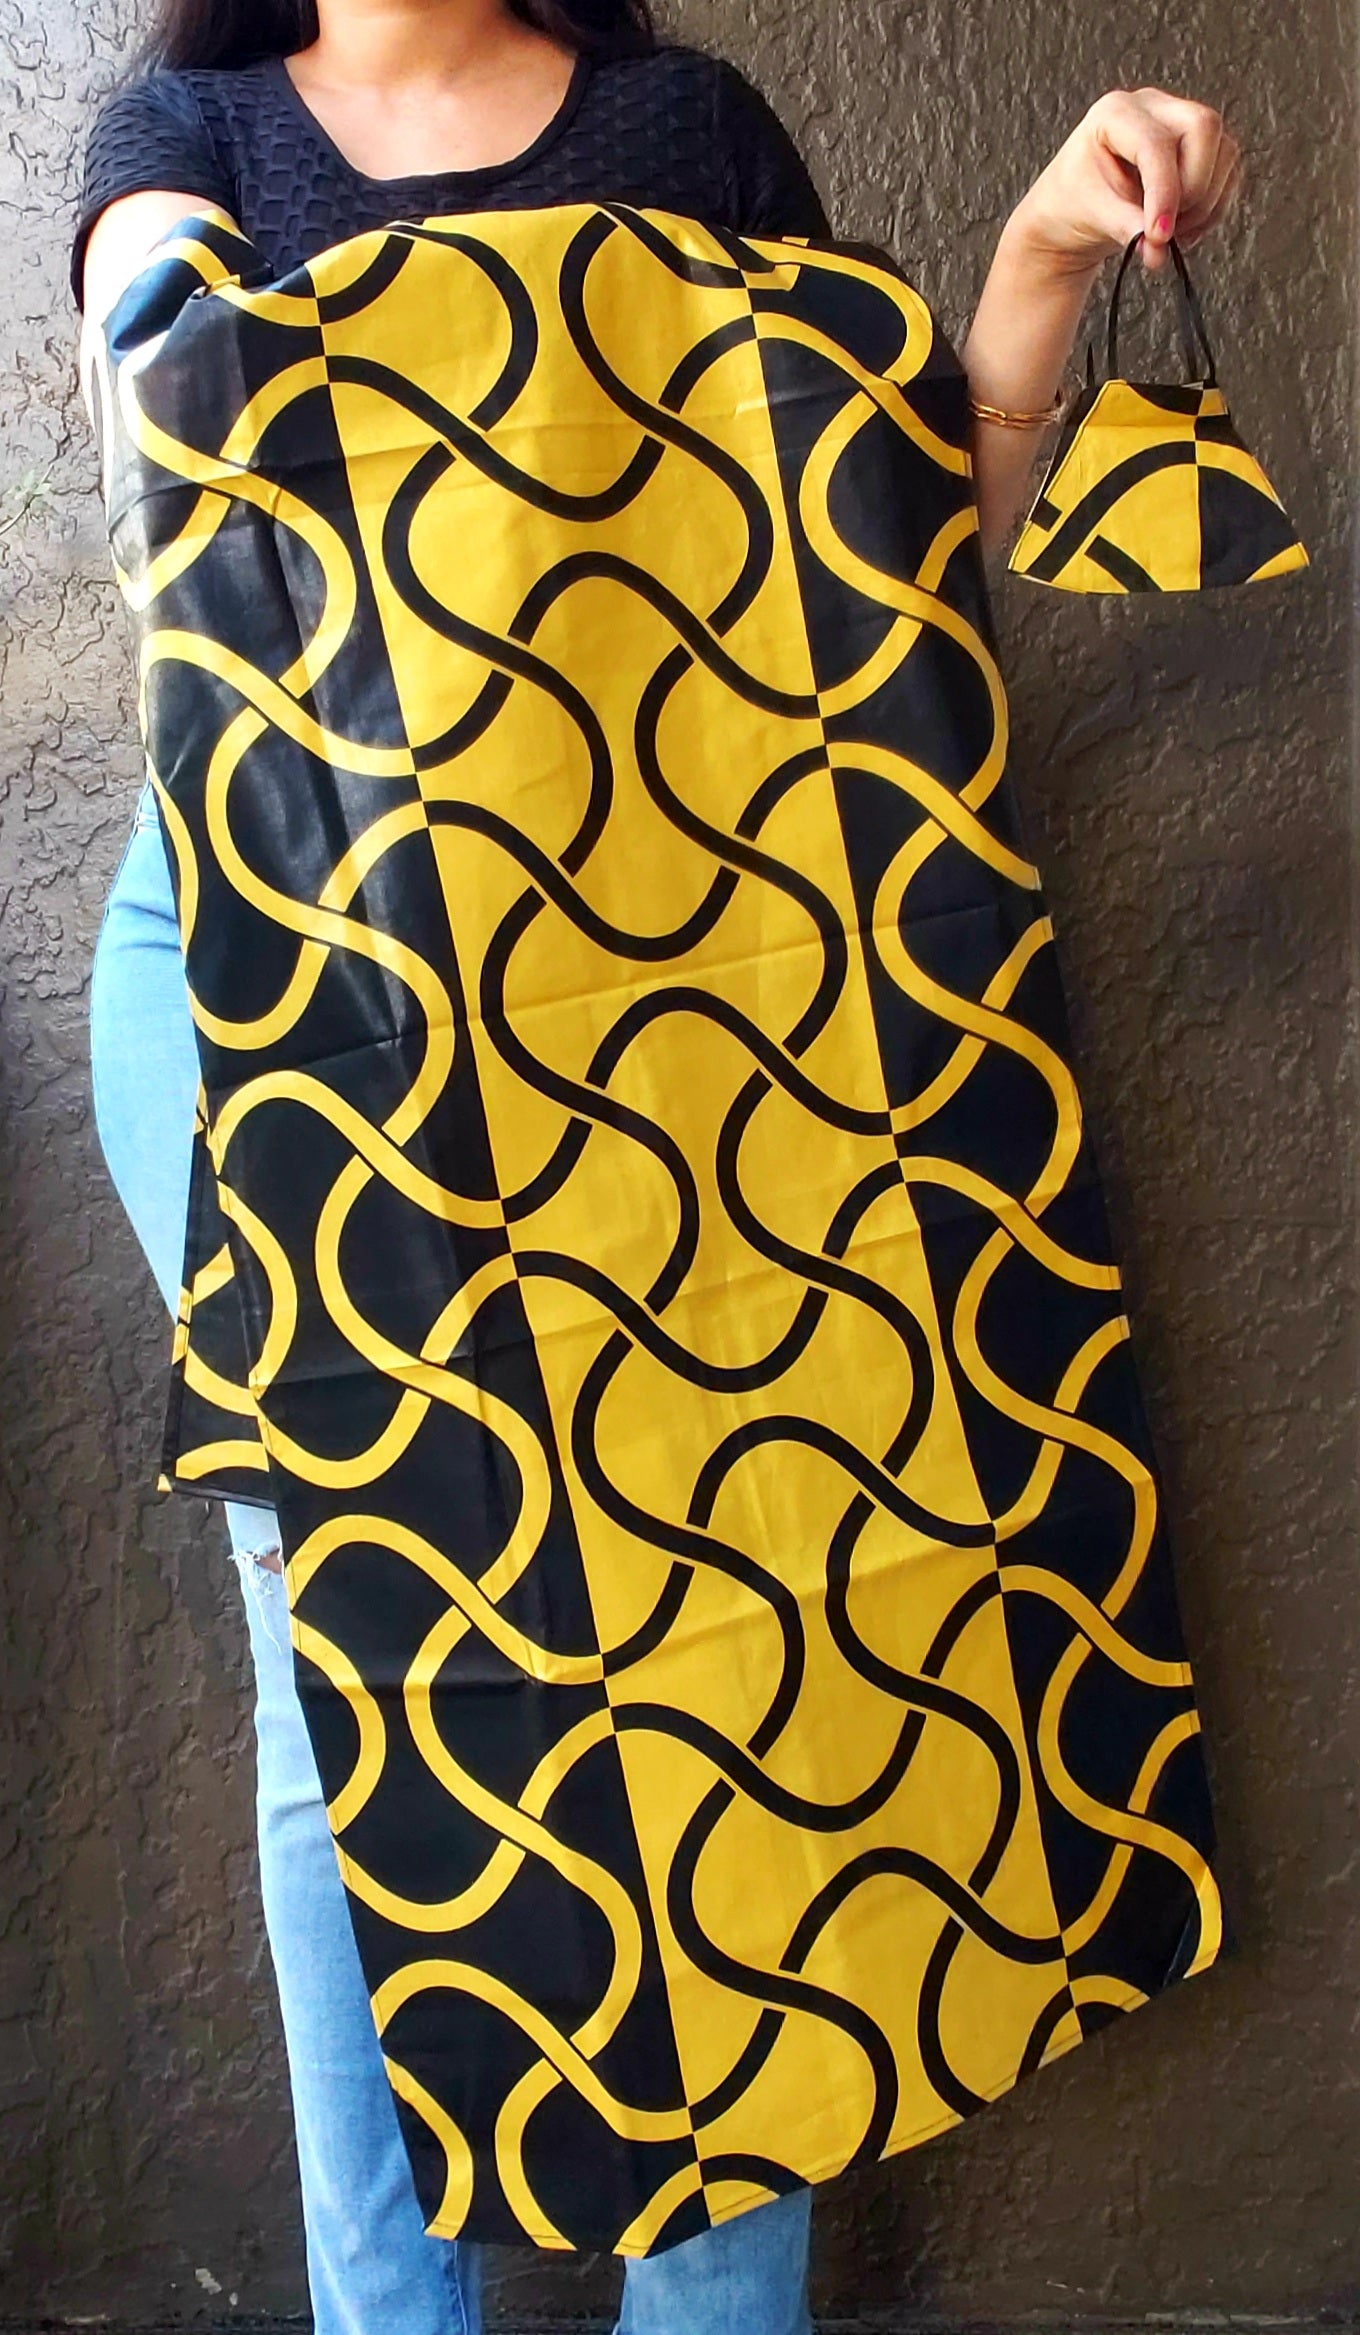 African Shawl/ Headscarf With Matching Mask- Black/Gold